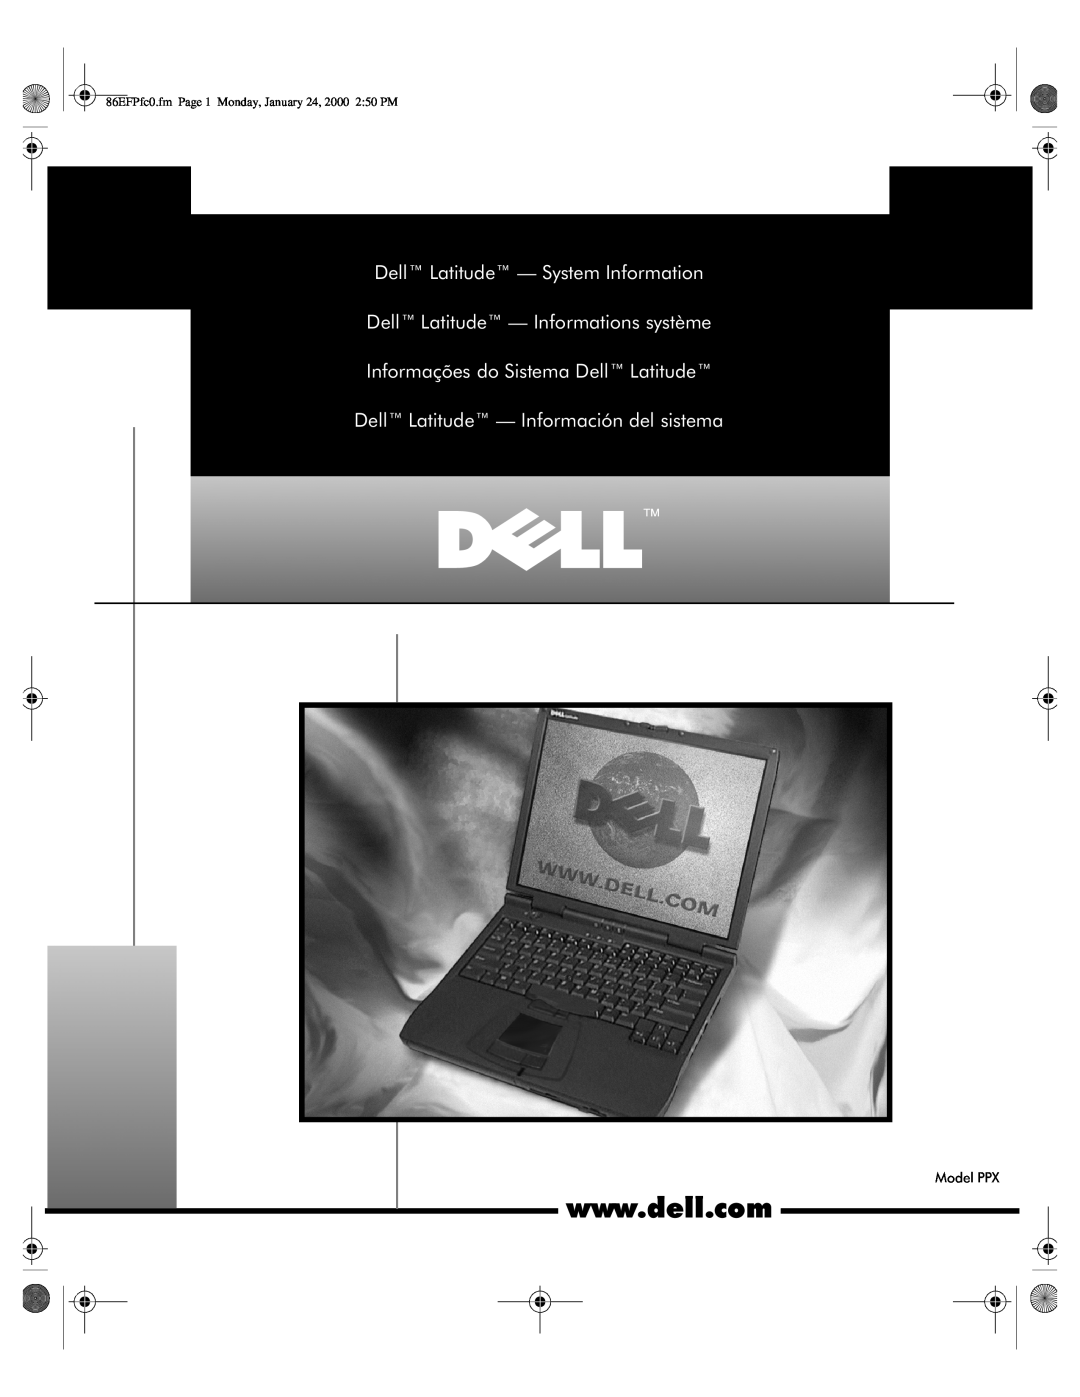 Dell PPX manual Dell Latitude - System Information, Dell Latitude - Informations système 